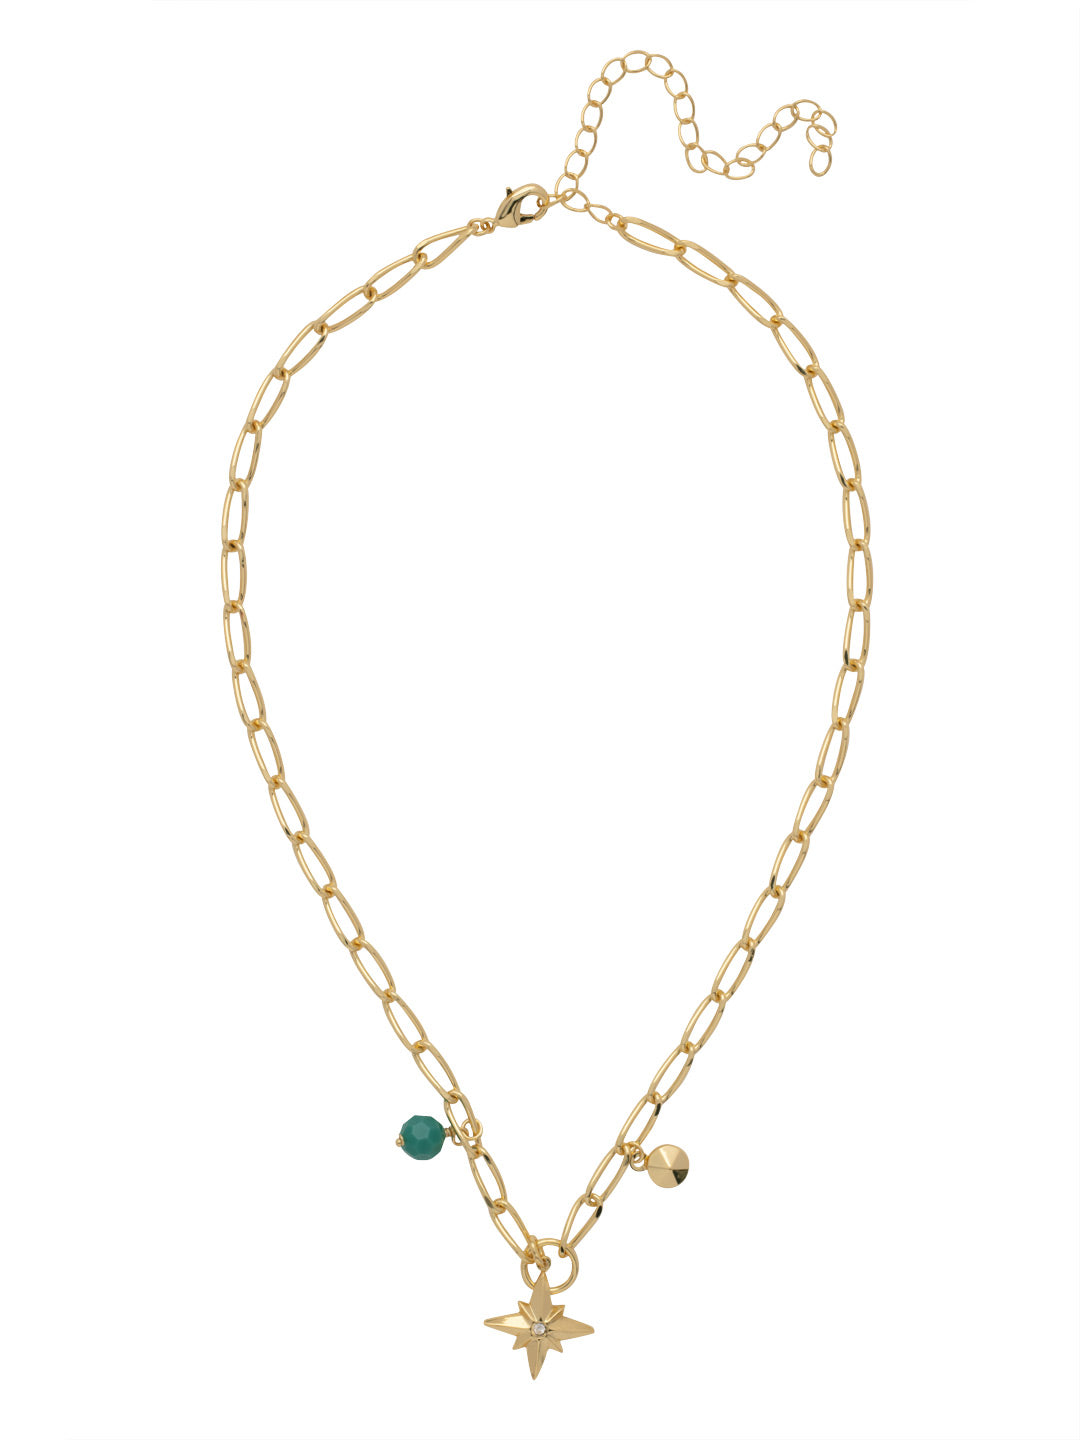 Henley Charm Tennis Necklace - 4NFF47BGTQ - <p>The Henley Charm Tennis Necklace features a metal ball charm, a semi-precious bead charm, and a crystal embellished star charm on a trendy adjustable chain, secured with a lobster claw clasp. From Sorrelli's Turquoise collection in our Bright Gold-tone finish.</p>